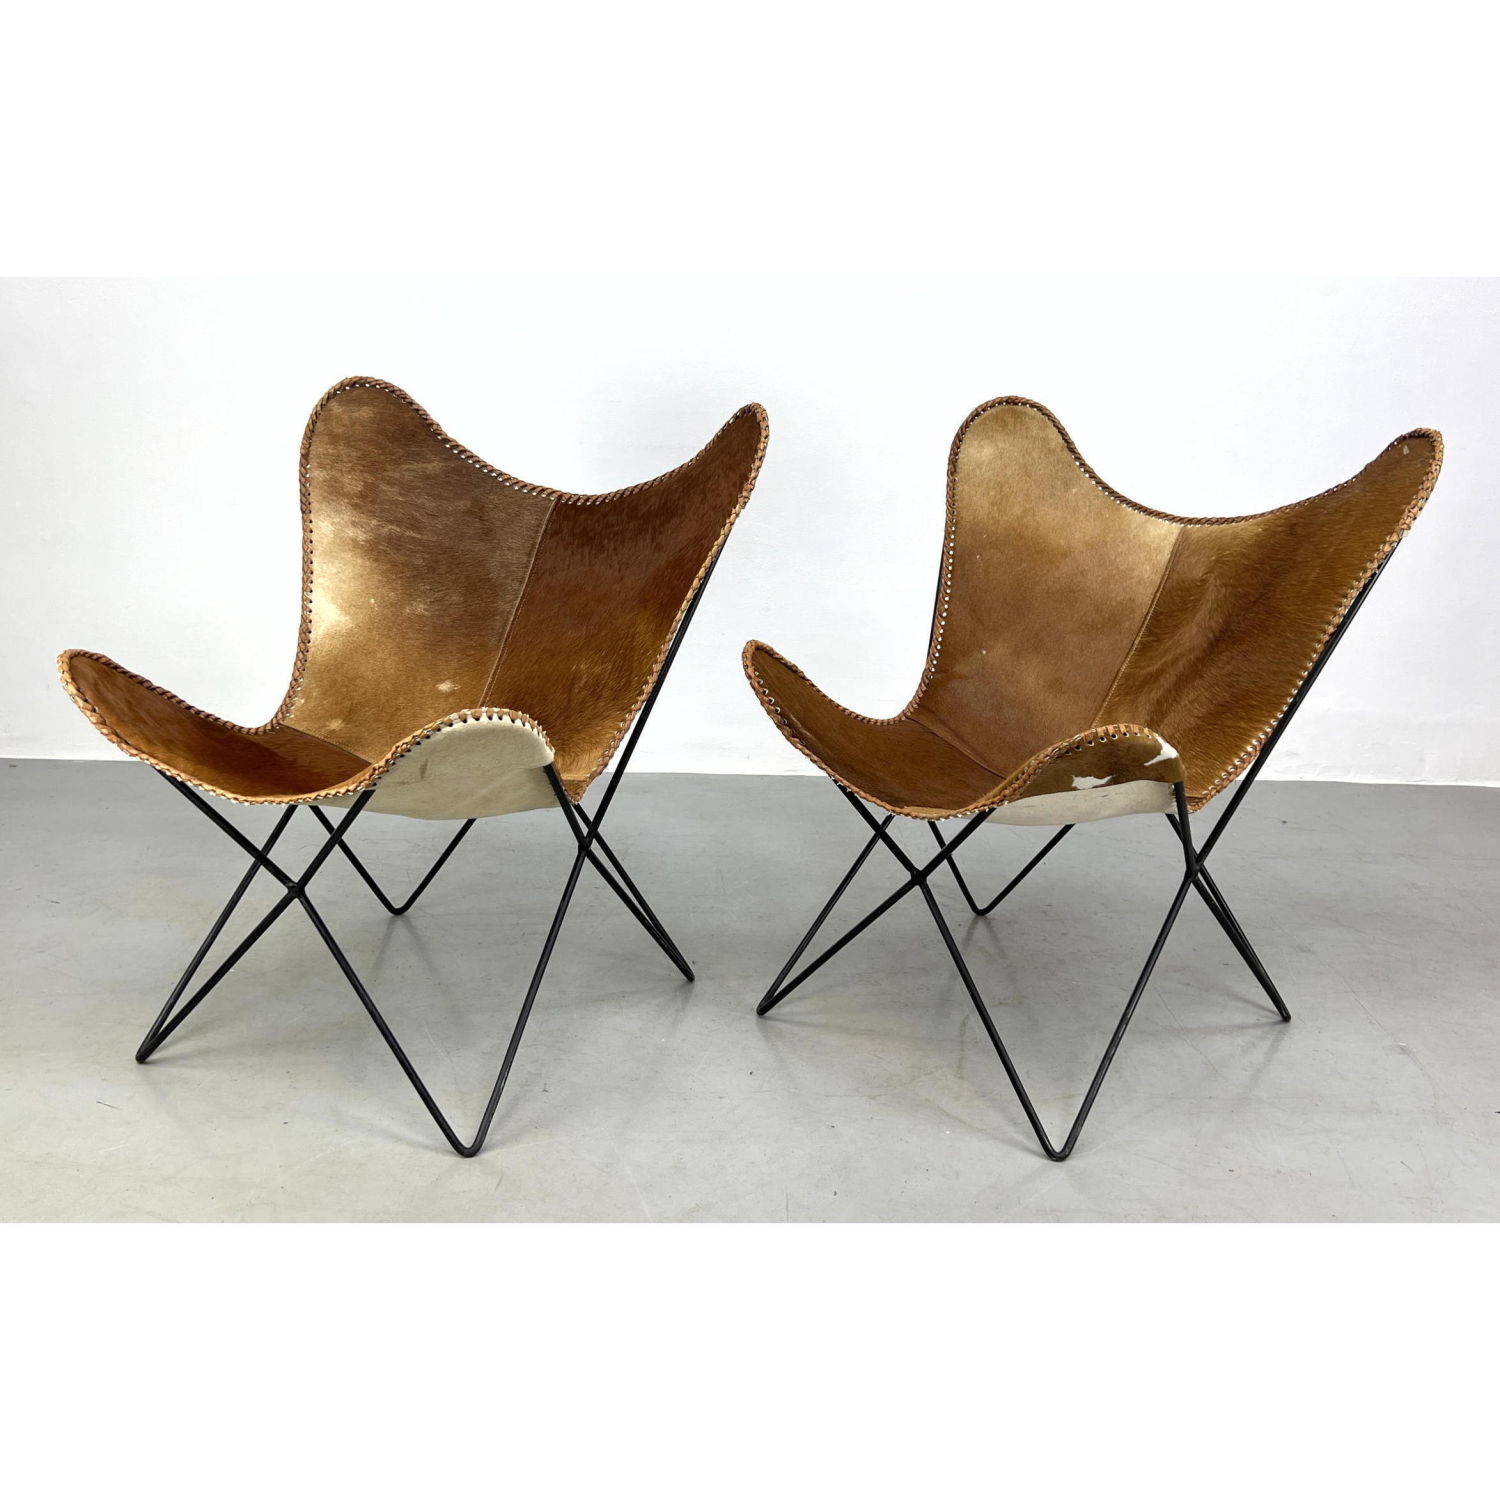 Pair of butterfly chairs with cowhide 2b9611